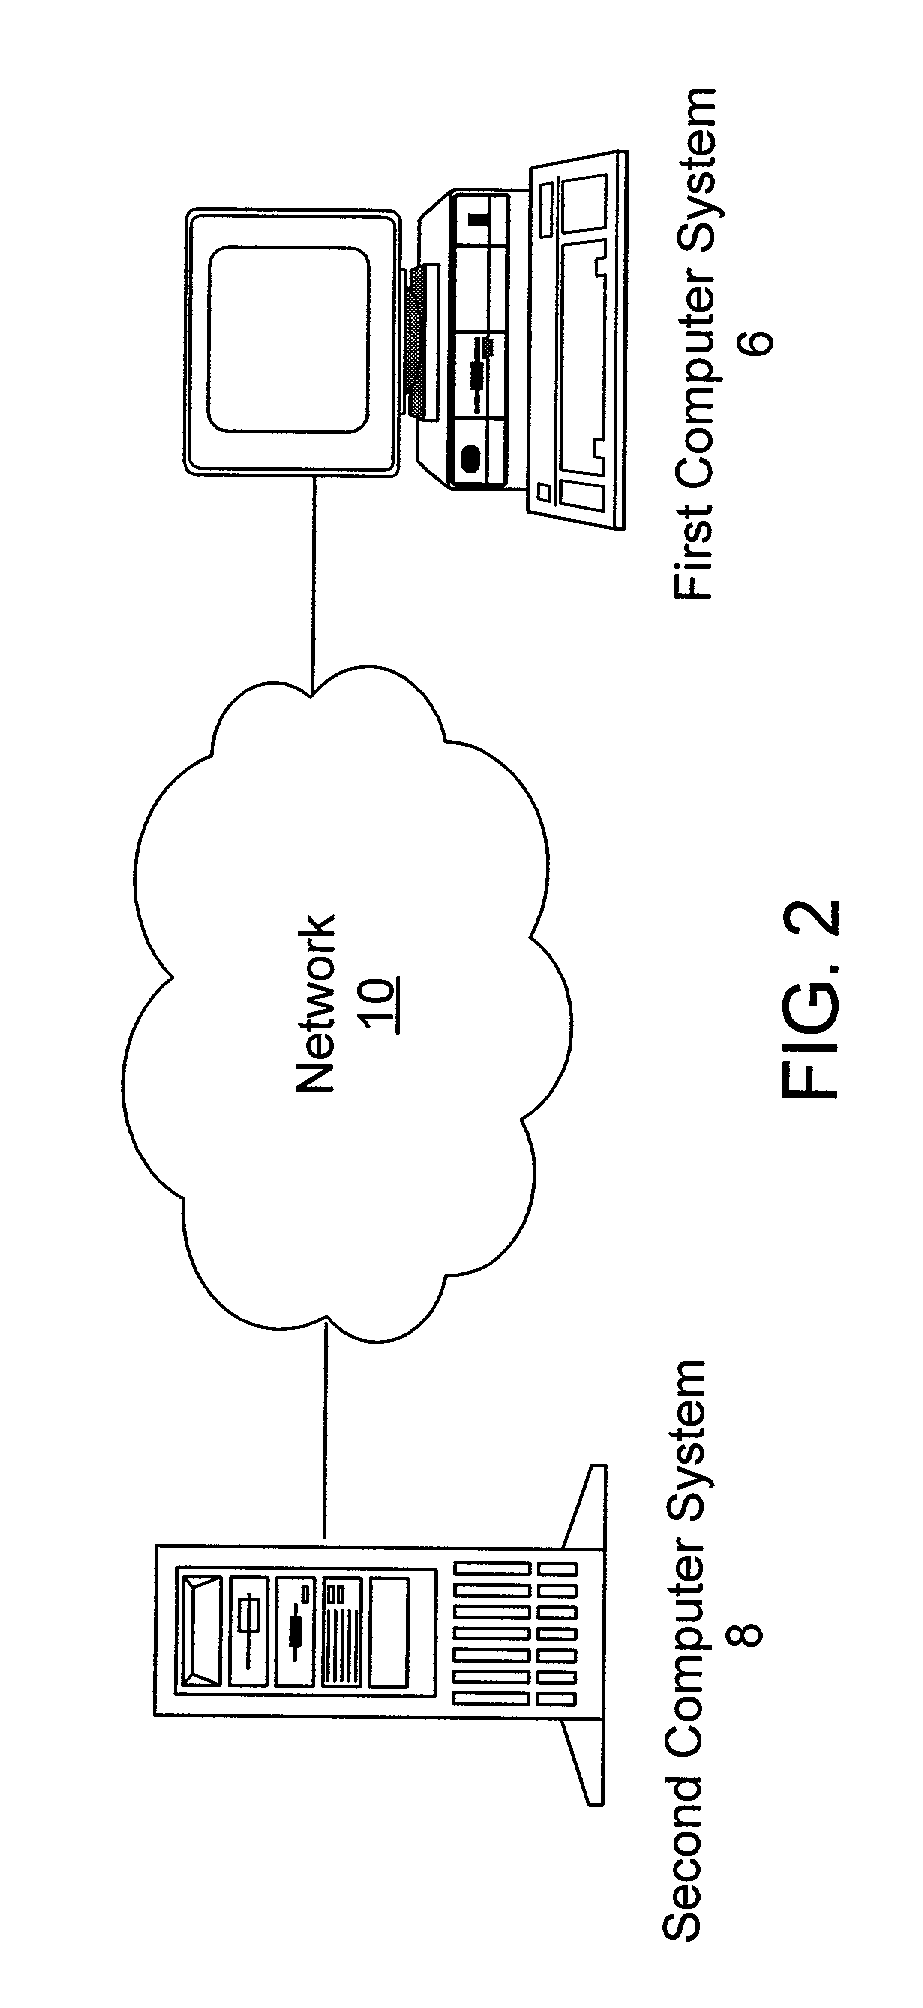 System and method for comparing database data